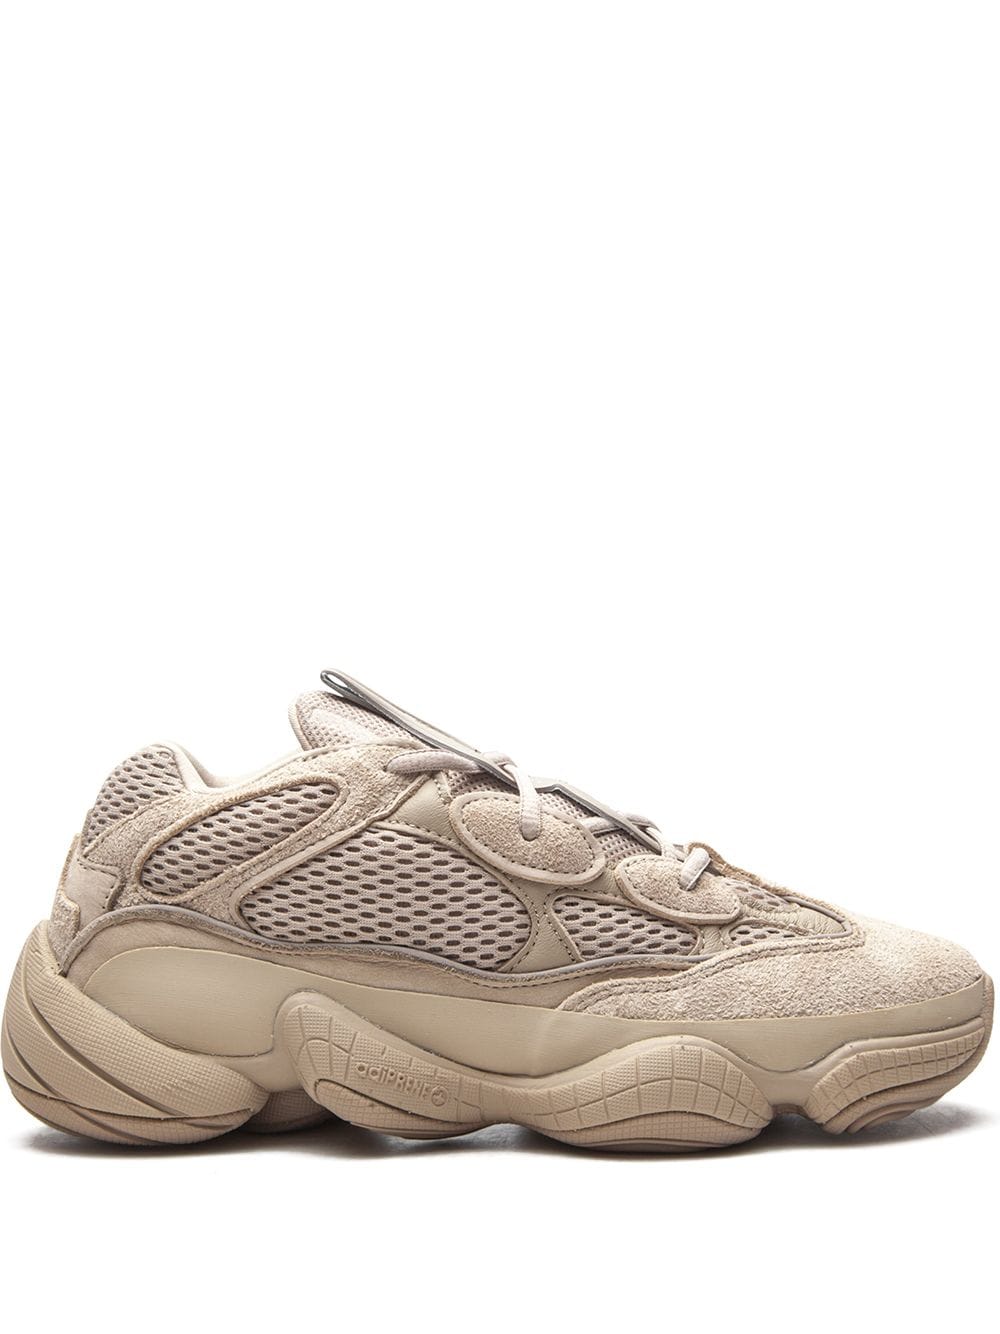 Yeezy 500 Taupe